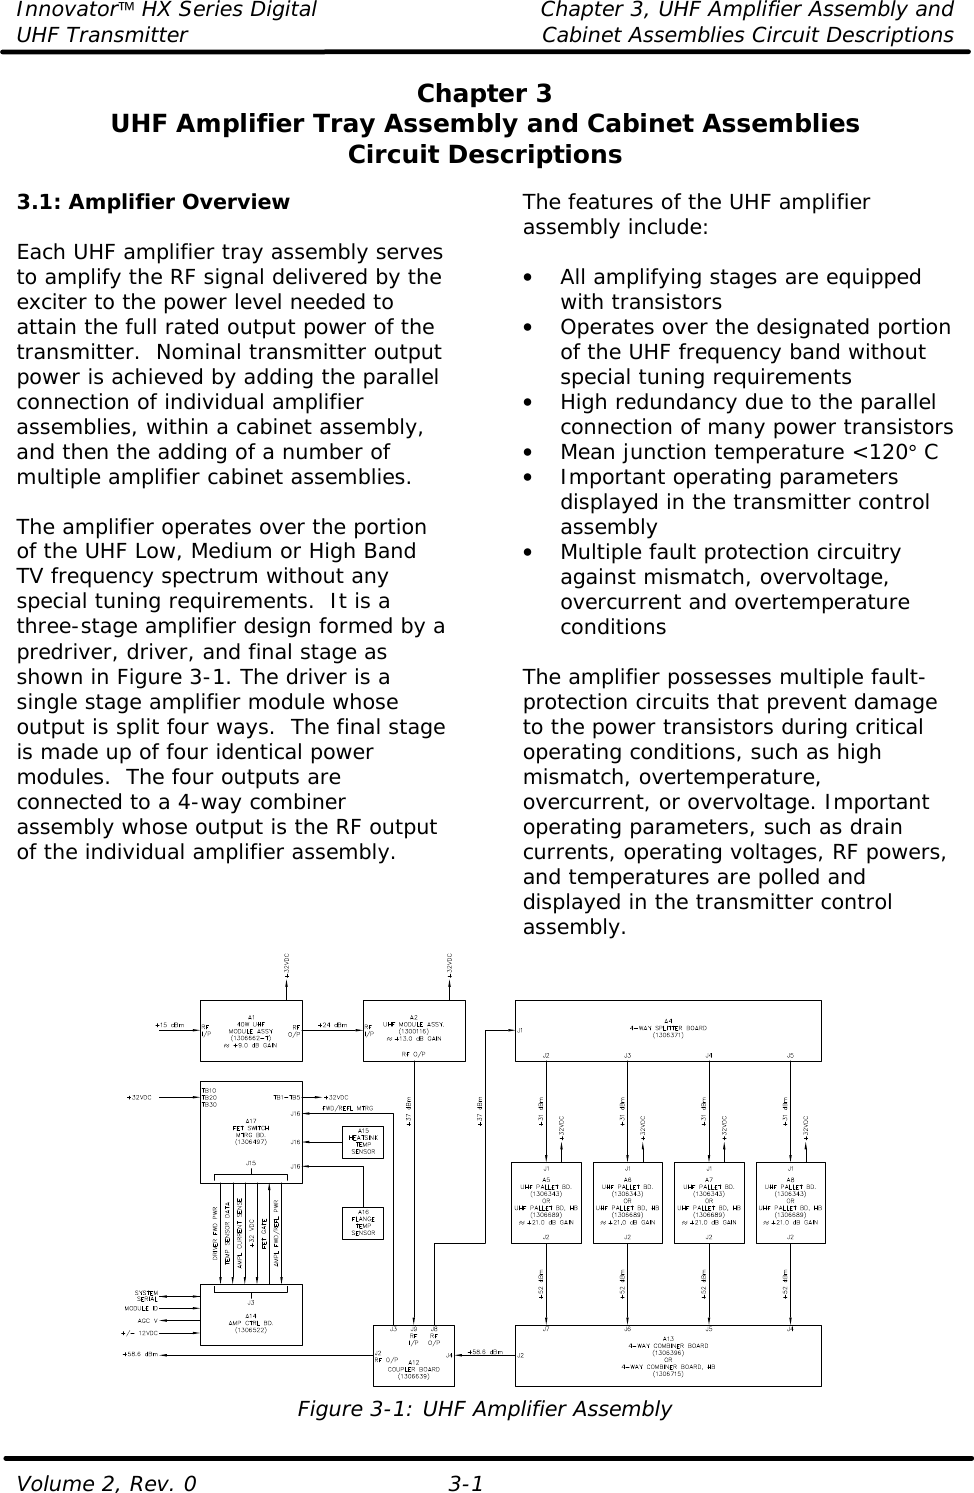 Innovator HX Series Digital Chapter 3, UHF Amplifier Assembly and UHF Transmitter Cabinet Assemblies Circuit Descriptions  Volume 2, Rev. 0 3-1 Chapter 3 UHF Amplifier Tray Assembly and Cabinet Assemblies Circuit Descriptions  3.1: Amplifier Overview  Each UHF amplifier tray assembly serves to amplify the RF signal delivered by the exciter to the power level needed to attain the full rated output power of the transmitter.  Nominal transmitter output power is achieved by adding the parallel connection of individual amplifier assemblies, within a cabinet assembly, and then the adding of a number of multiple amplifier cabinet assemblies.  The amplifier operates over the portion of the UHF Low, Medium or High Band TV frequency spectrum without any special tuning requirements.  It is a three-stage amplifier design formed by a predriver, driver, and final stage as shown in Figure 3-1. The driver is a single stage amplifier module whose output is split four ways.  The final stage is made up of four identical power modules.  The four outputs are connected to a 4-way combiner assembly whose output is the RF output of the individual amplifier assembly. The features of the UHF amplifier assembly include:  • All amplifying stages are equipped with transistors • Operates over the designated portion of the UHF frequency band without special tuning requirements • High redundancy due to the parallel connection of many power transistors • Mean junction temperature &lt;120° C • Important operating parameters displayed in the transmitter control assembly • Multiple fault protection circuitry against mismatch, overvoltage, overcurrent and overtemperature conditions  The amplifier possesses multiple fault-protection circuits that prevent damage to the power transistors during critical operating conditions, such as high mismatch, overtemperature, overcurrent, or overvoltage. Important operating parameters, such as drain currents, operating voltages, RF powers, and temperatures are polled and displayed in the transmitter control assembly.   Figure 3-1: UHF Amplifier Assembly 